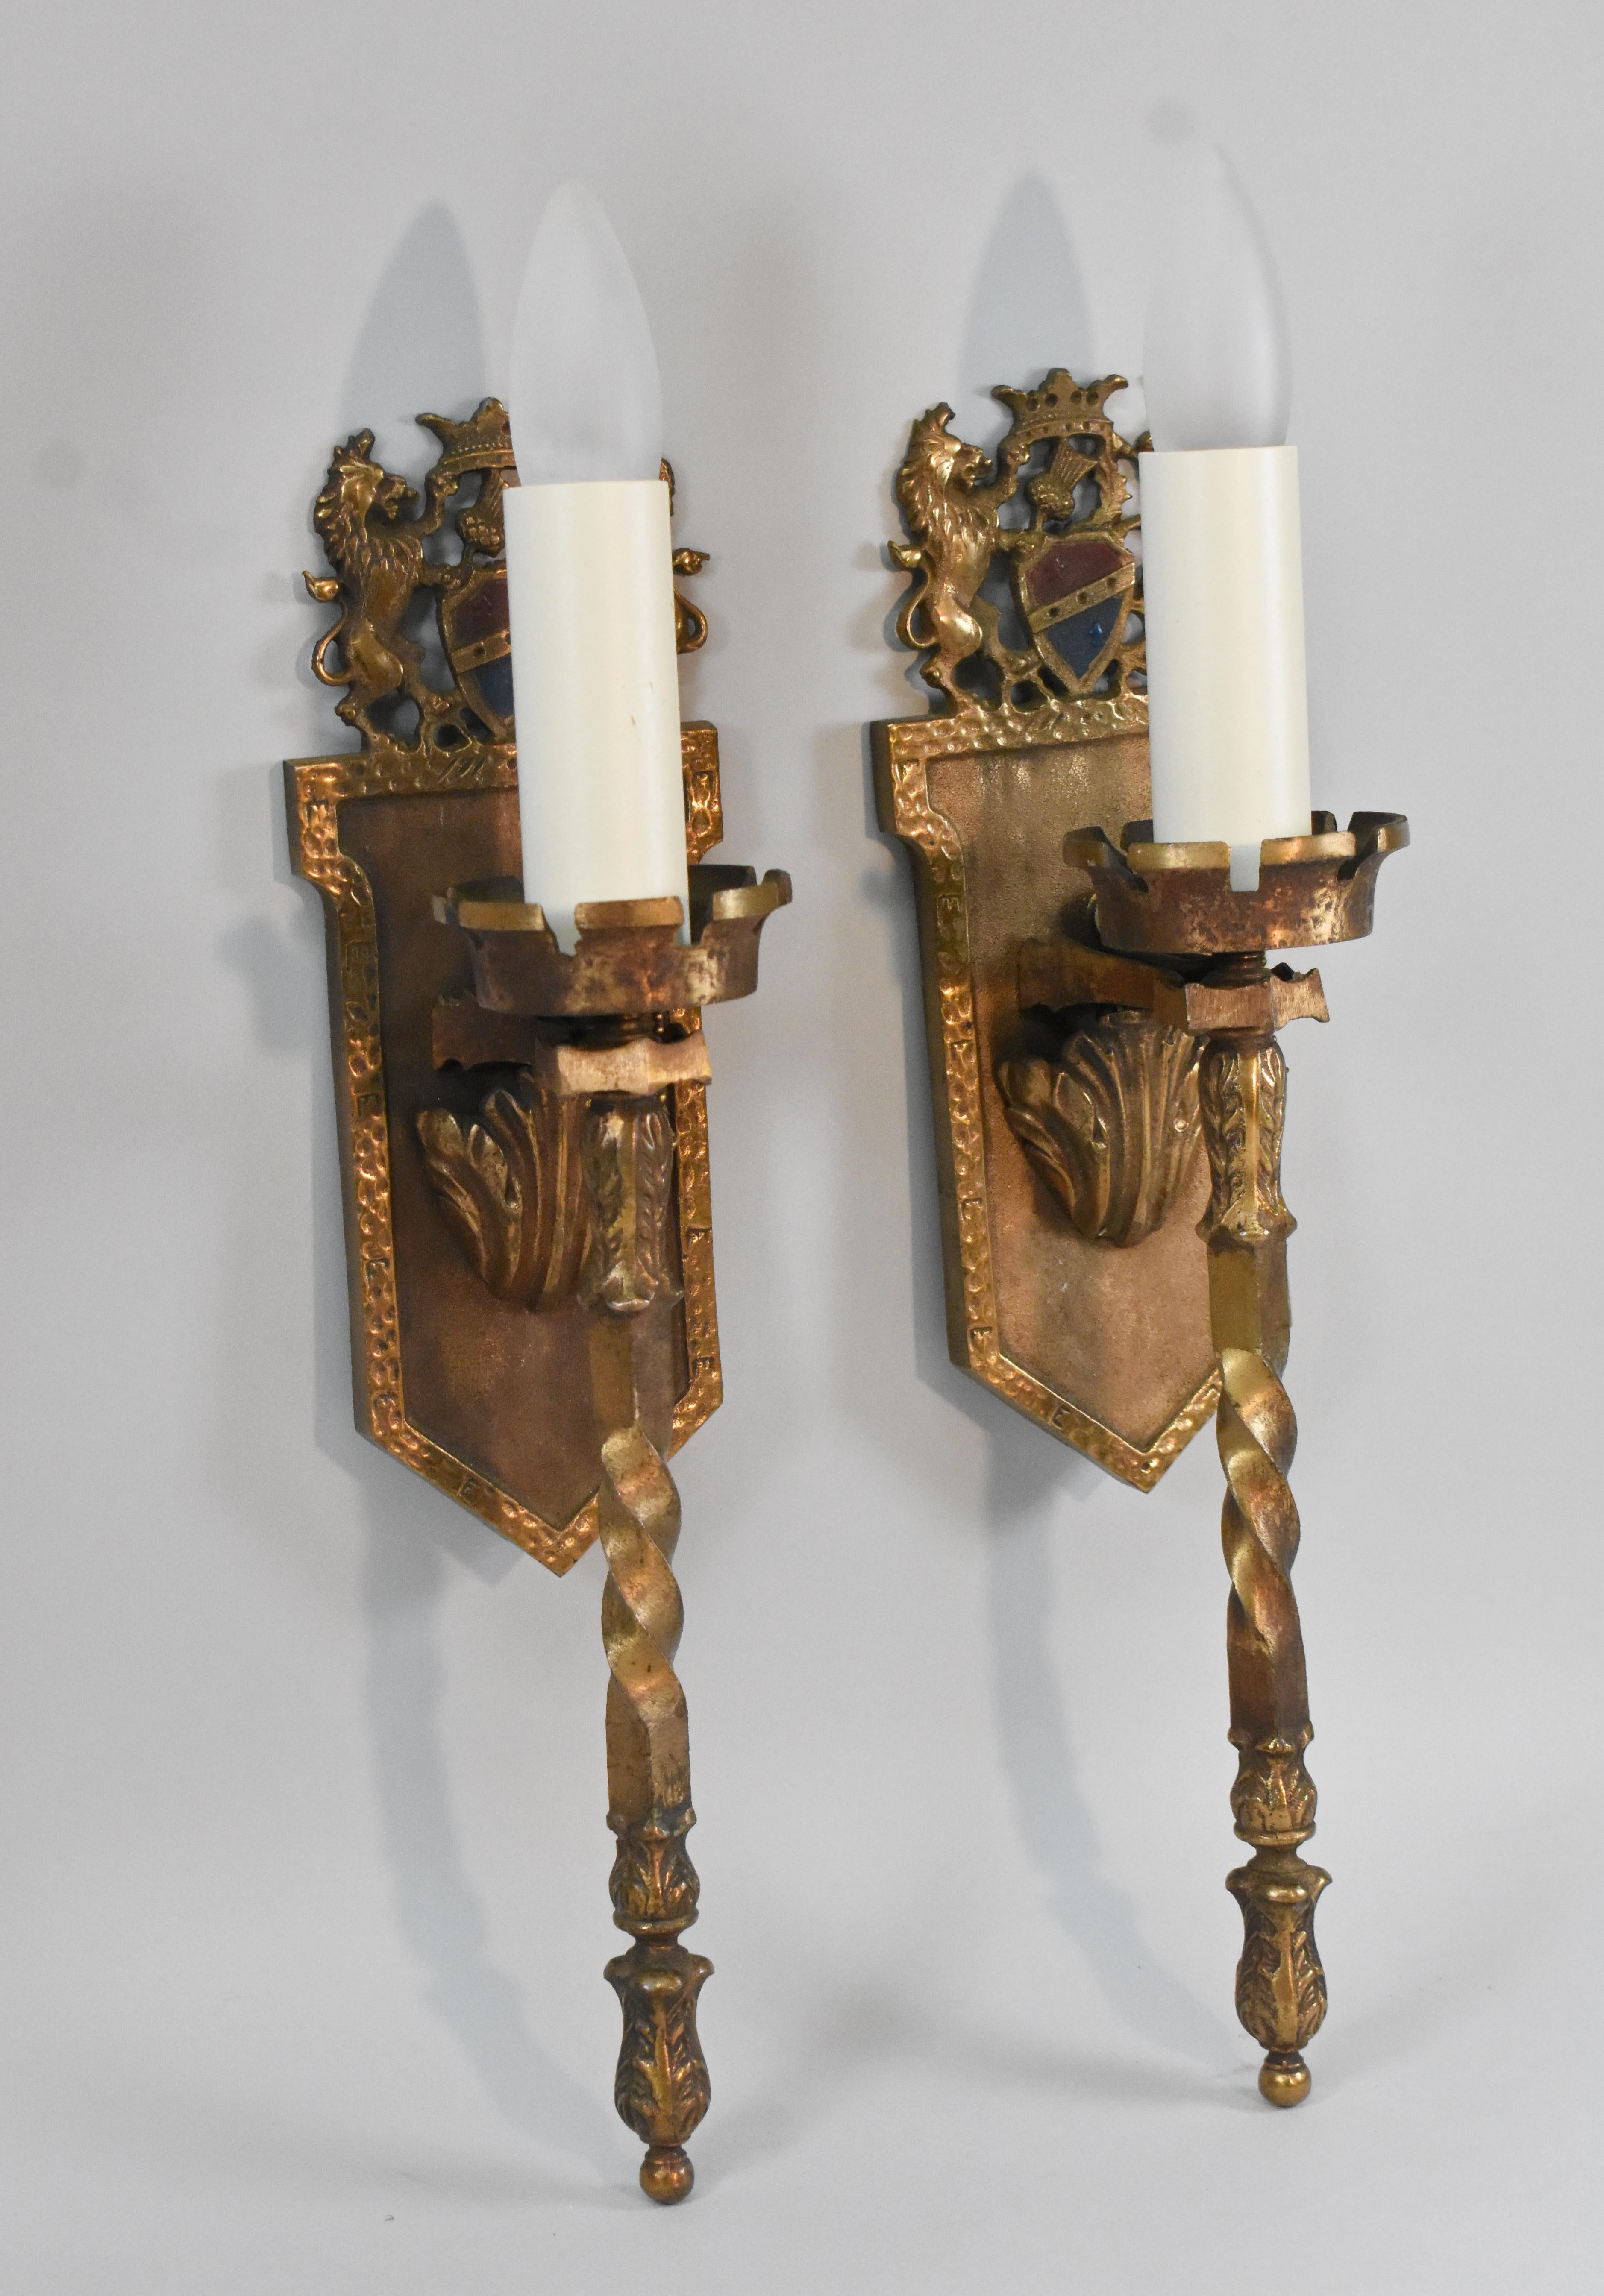 Pair of brass Gothic wall sconces with center top shield with thistle and flanking unicorns. Twisted stem design. Fixtures have been rewired.